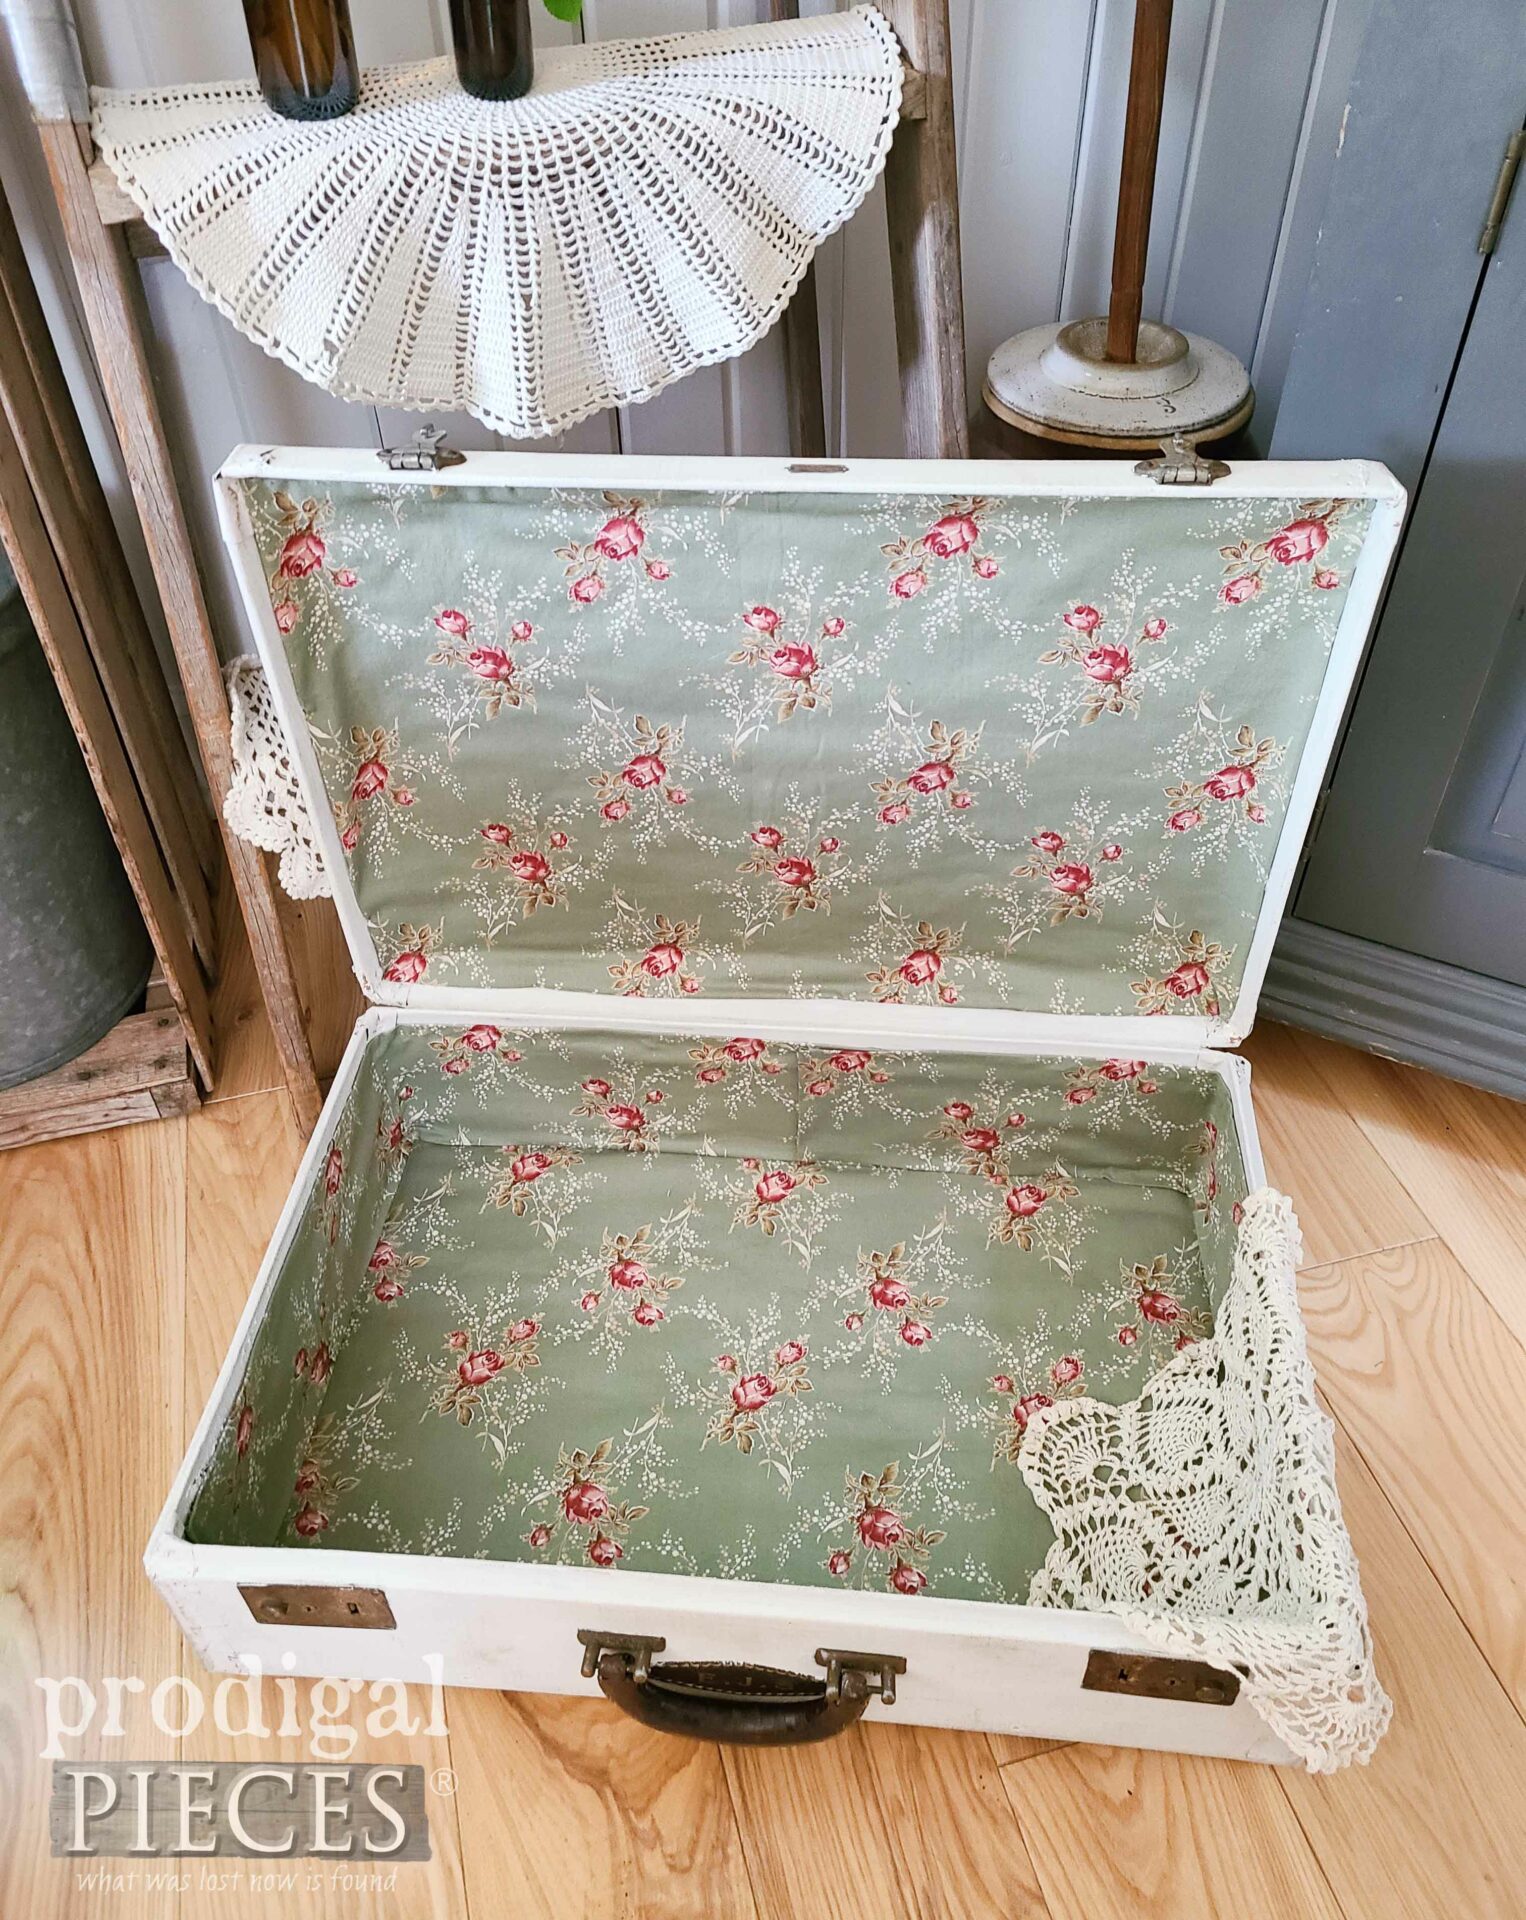 How to Line a Vintage Luggage Painted by Larissa of Prodigal Pieces | prodigalpieces.com #prodigalpieces #diy #tutorial